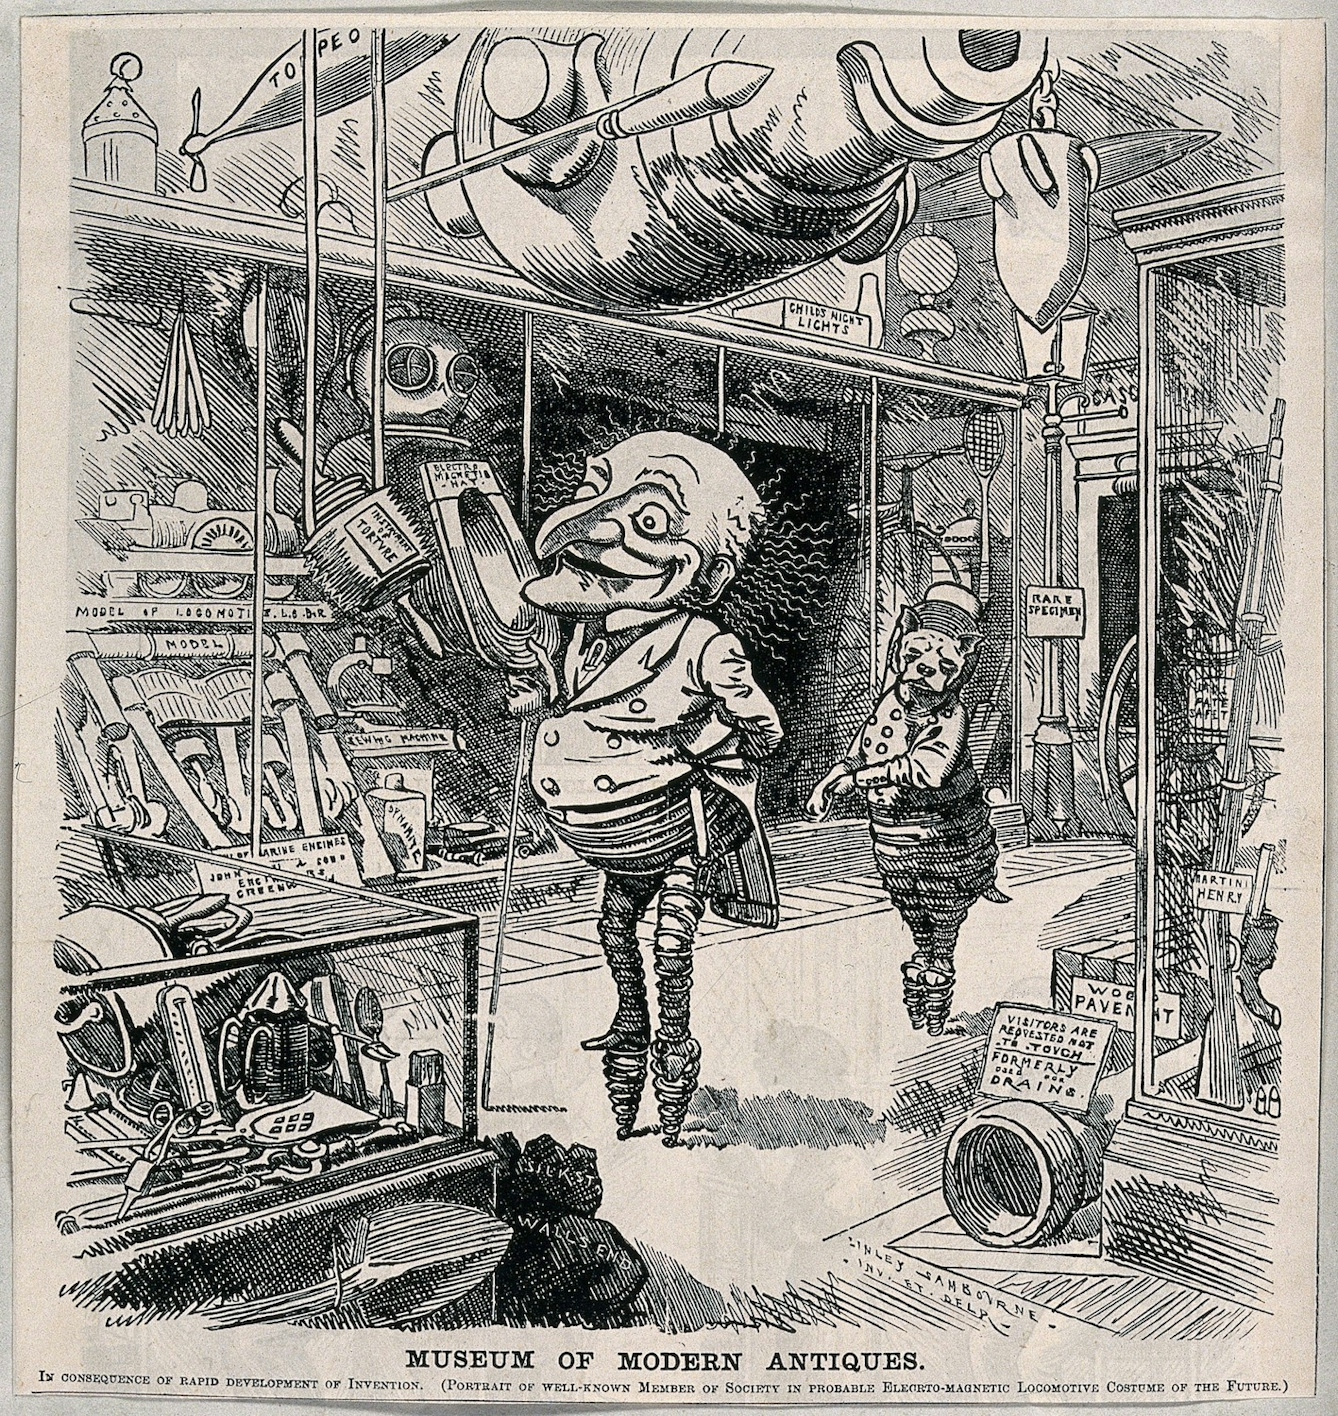 Drawing of Mr Punch and a cat in an antiques shop